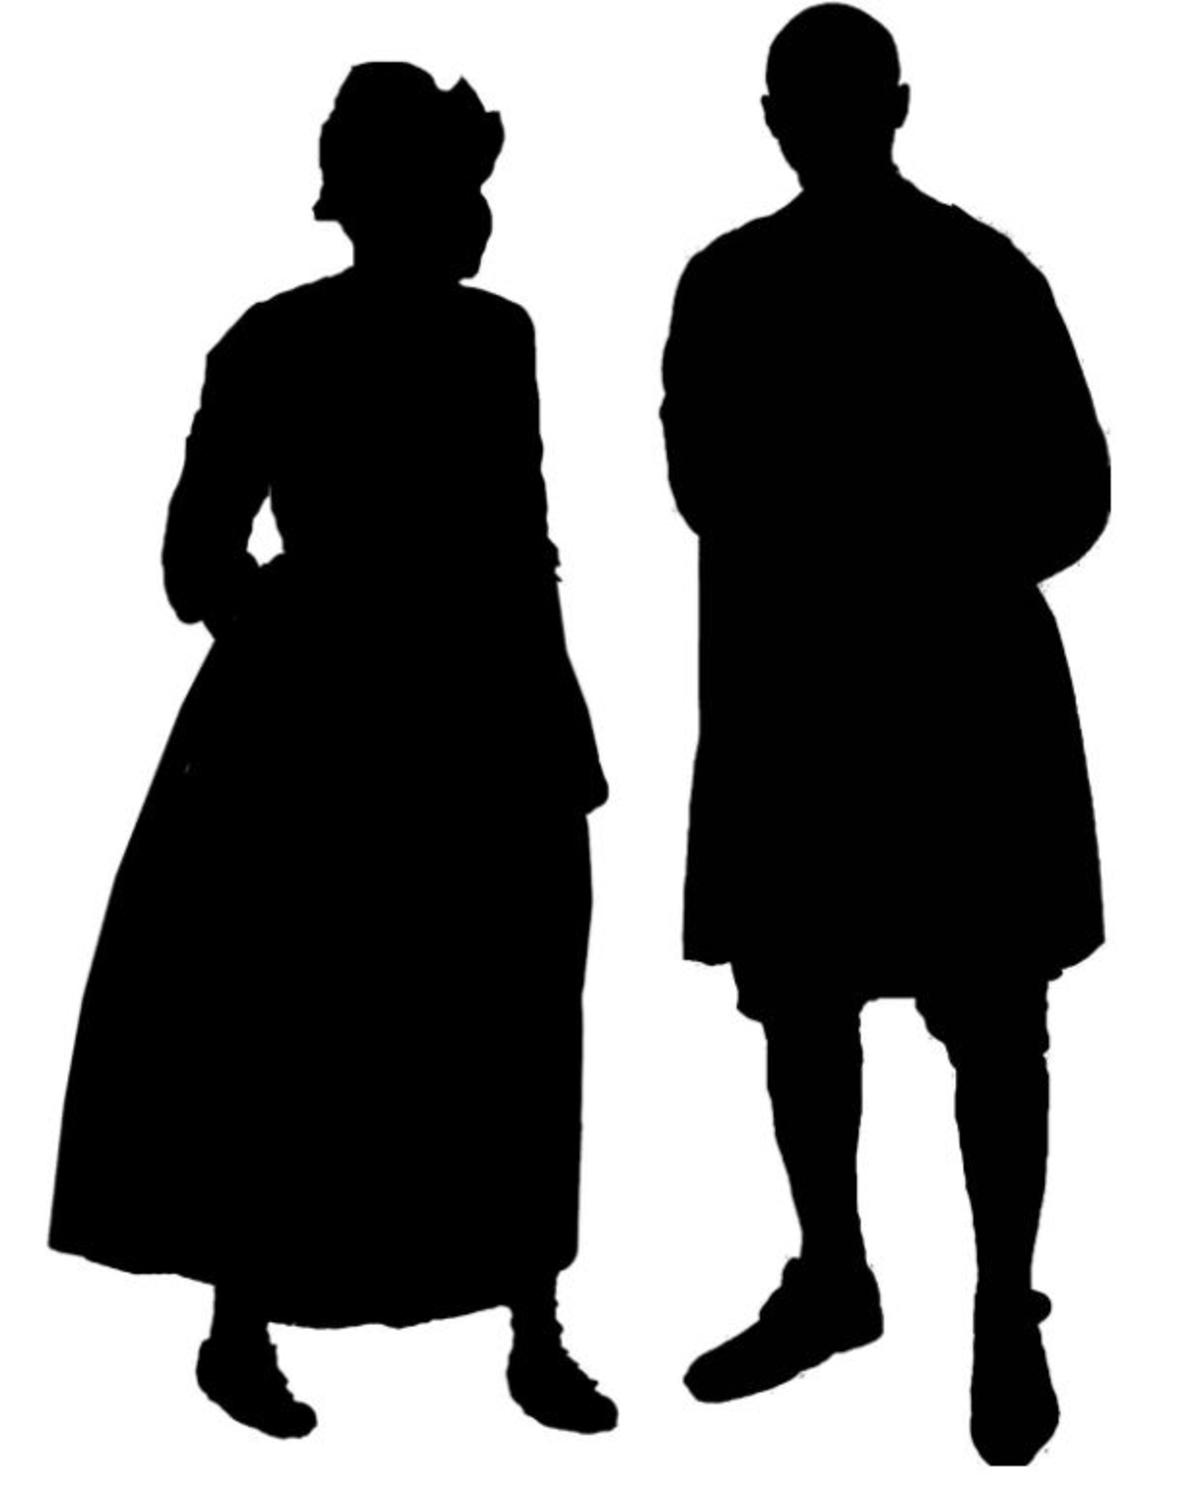 A silhouette of a man and a woman in 18th-century clothing.